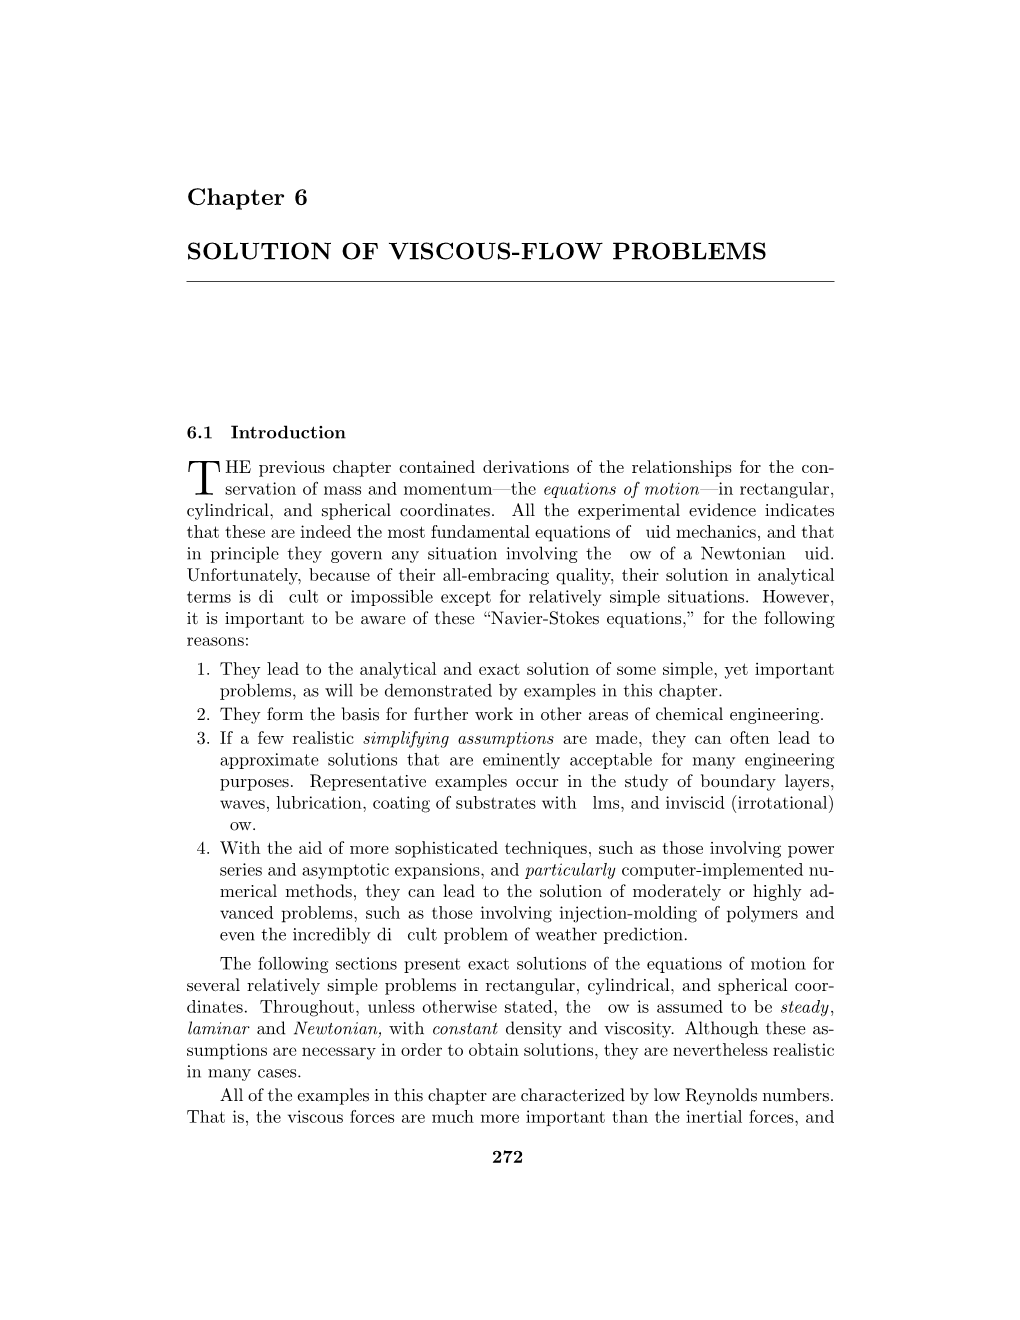 Chapter 6 SOLUTION of VISCOUS-FLOW PROBLEMS